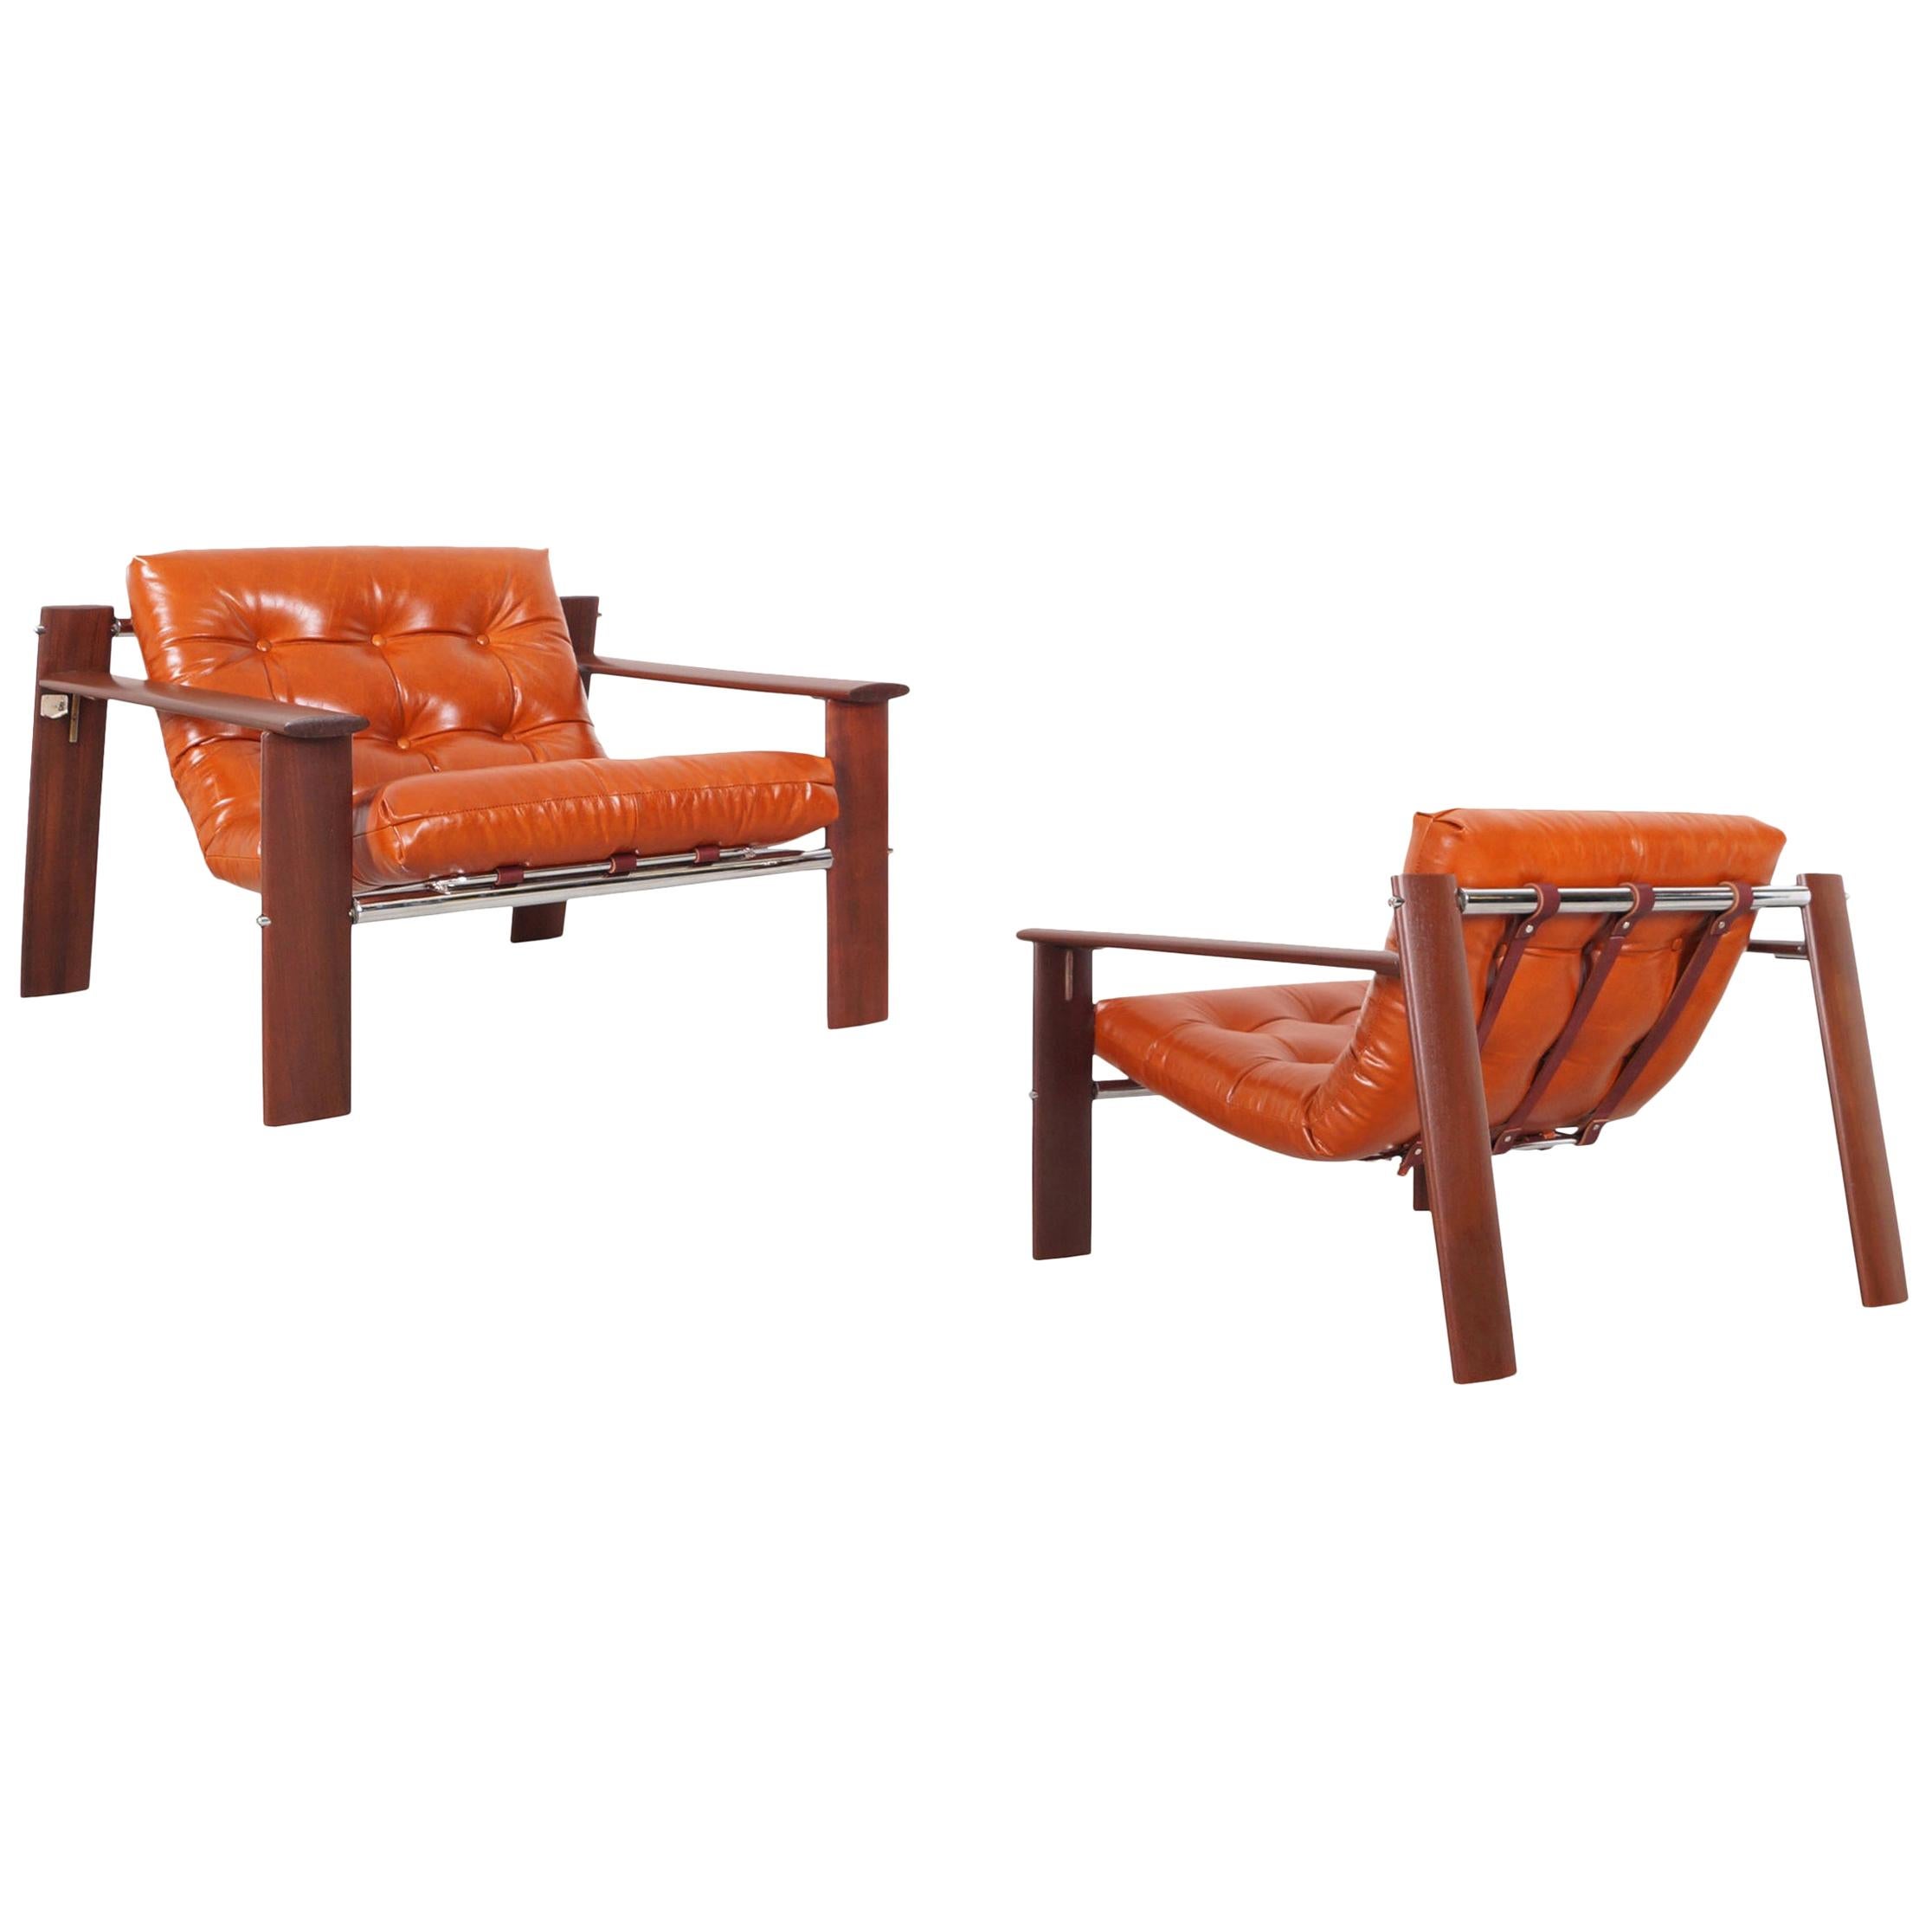 Vintage Brazilian MP-129 Jacaranda and Leather Lounge Chairs by Percival Lafer